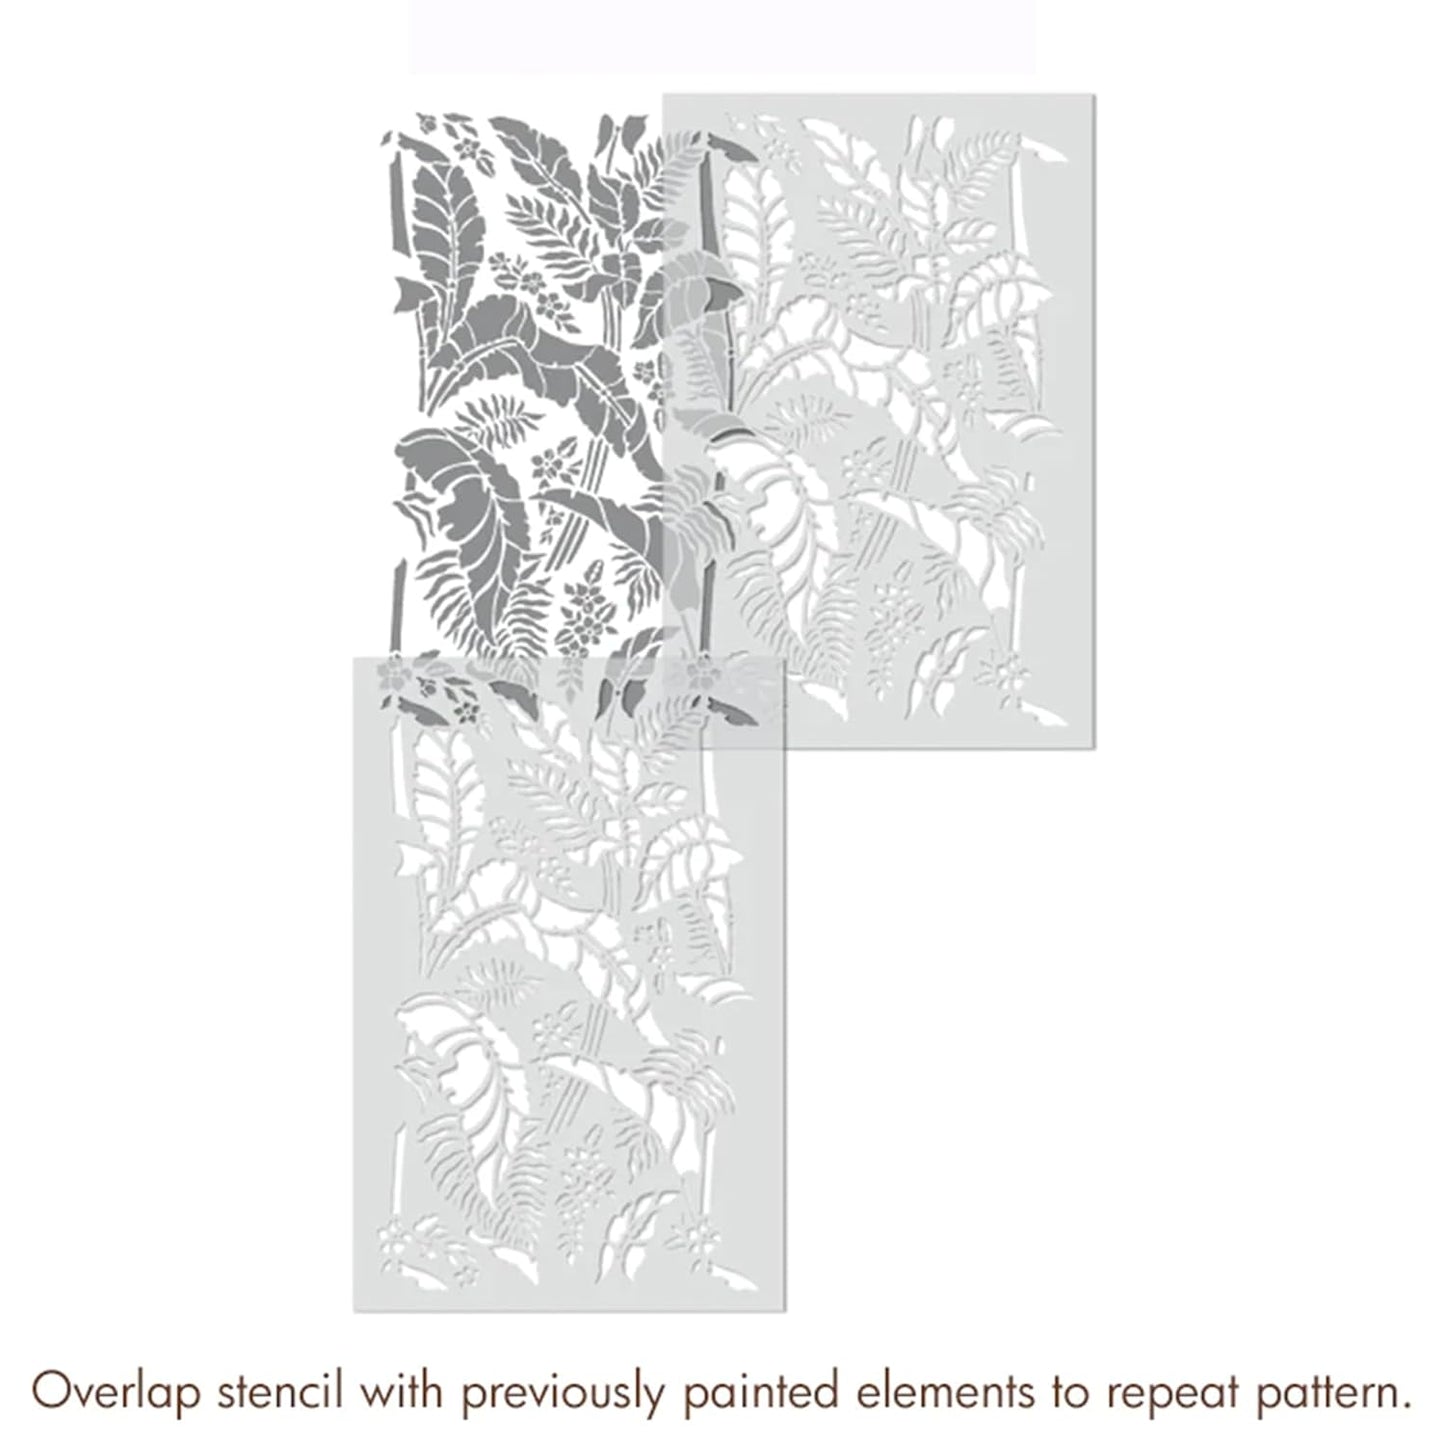 Latest Papua Palm Tree Wall Stencils for Wall Painting - Pack of 1, Sheet Size 24 x 36 inch/Design for Wall Painting 22 x 34 inch - Large